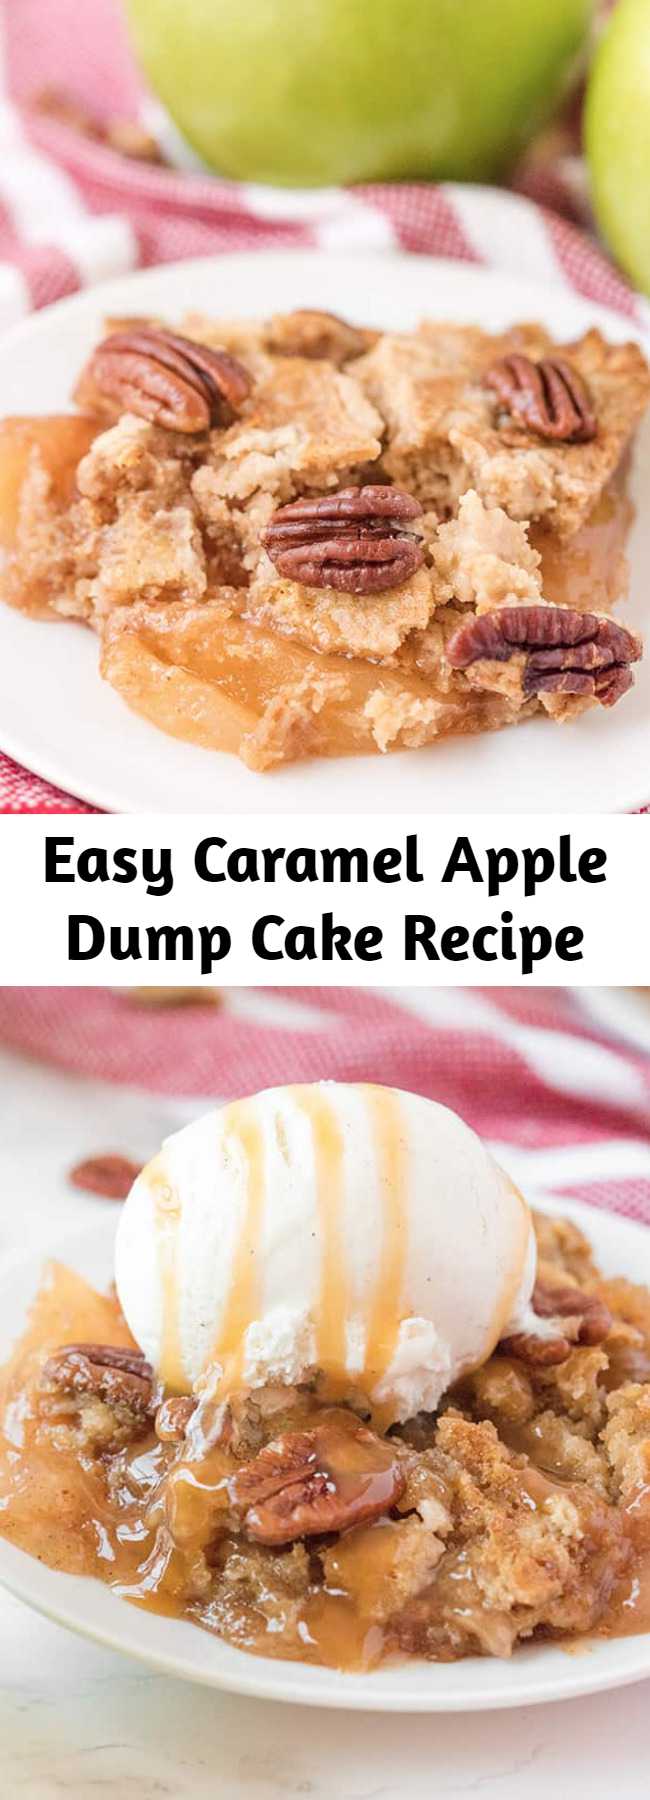 Easy Caramel Apple Dump Cake Recipe - SA simple recipe for Caramel Apple Dump cake made with butter pecan cake mix and apple pie filling! A tender and moist spiced cake with tender apples throughout topped with nuts and a caramel drizzle that is the perfect amount of sweetness. Add a scoop of ice cream or dollop of whipped cream and you have a straightforward dessert is crowd worthy. #dumpcake #caramel #apples